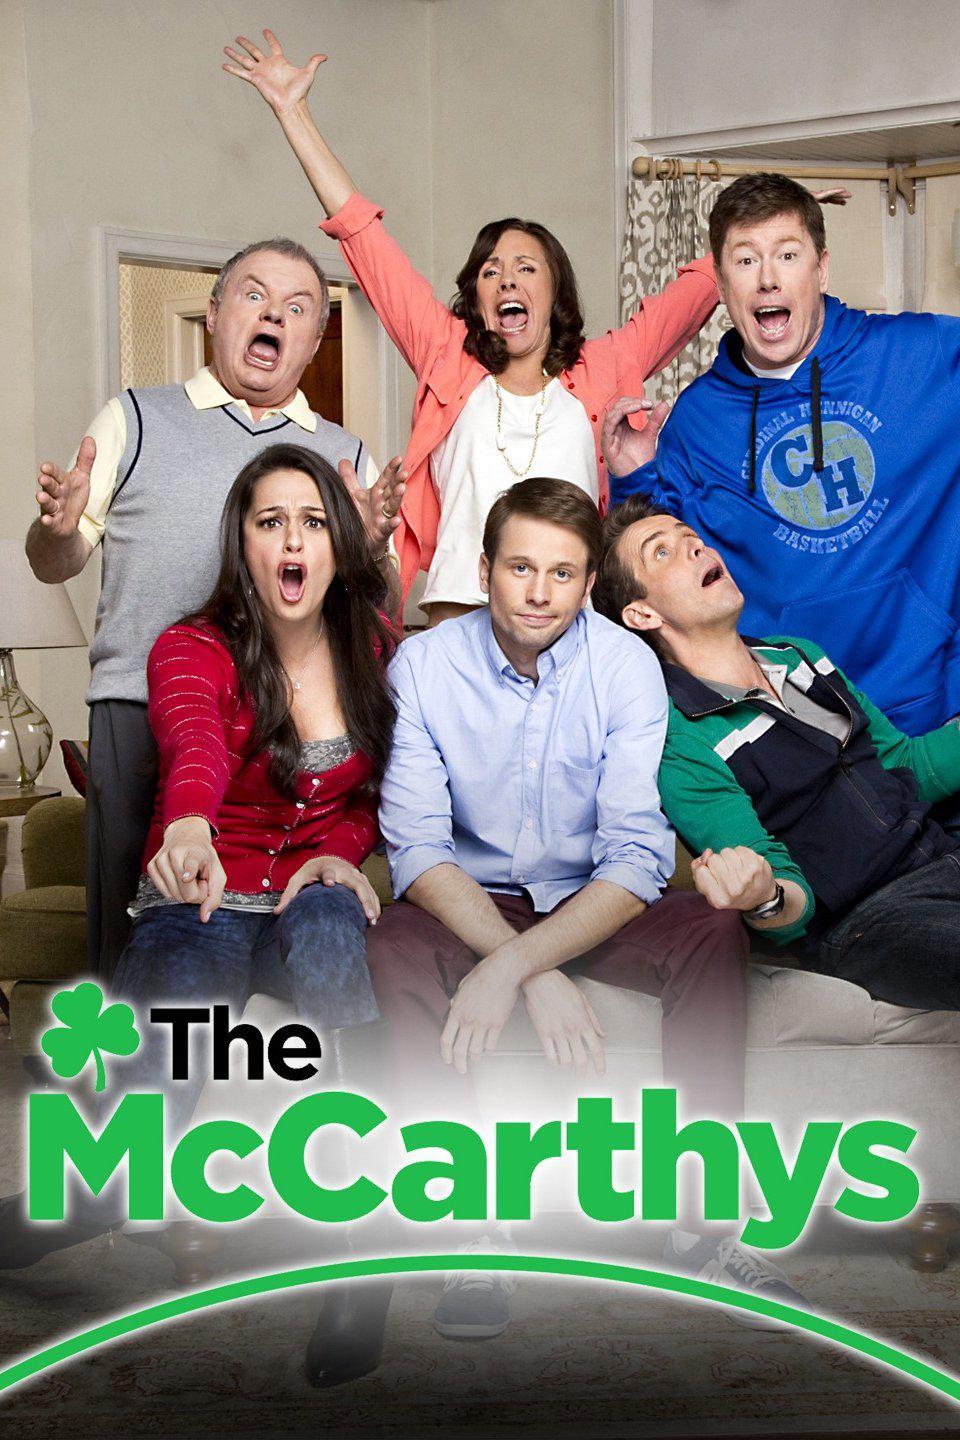 TV ratings for The McCarthys in Suecia. CBS TV series